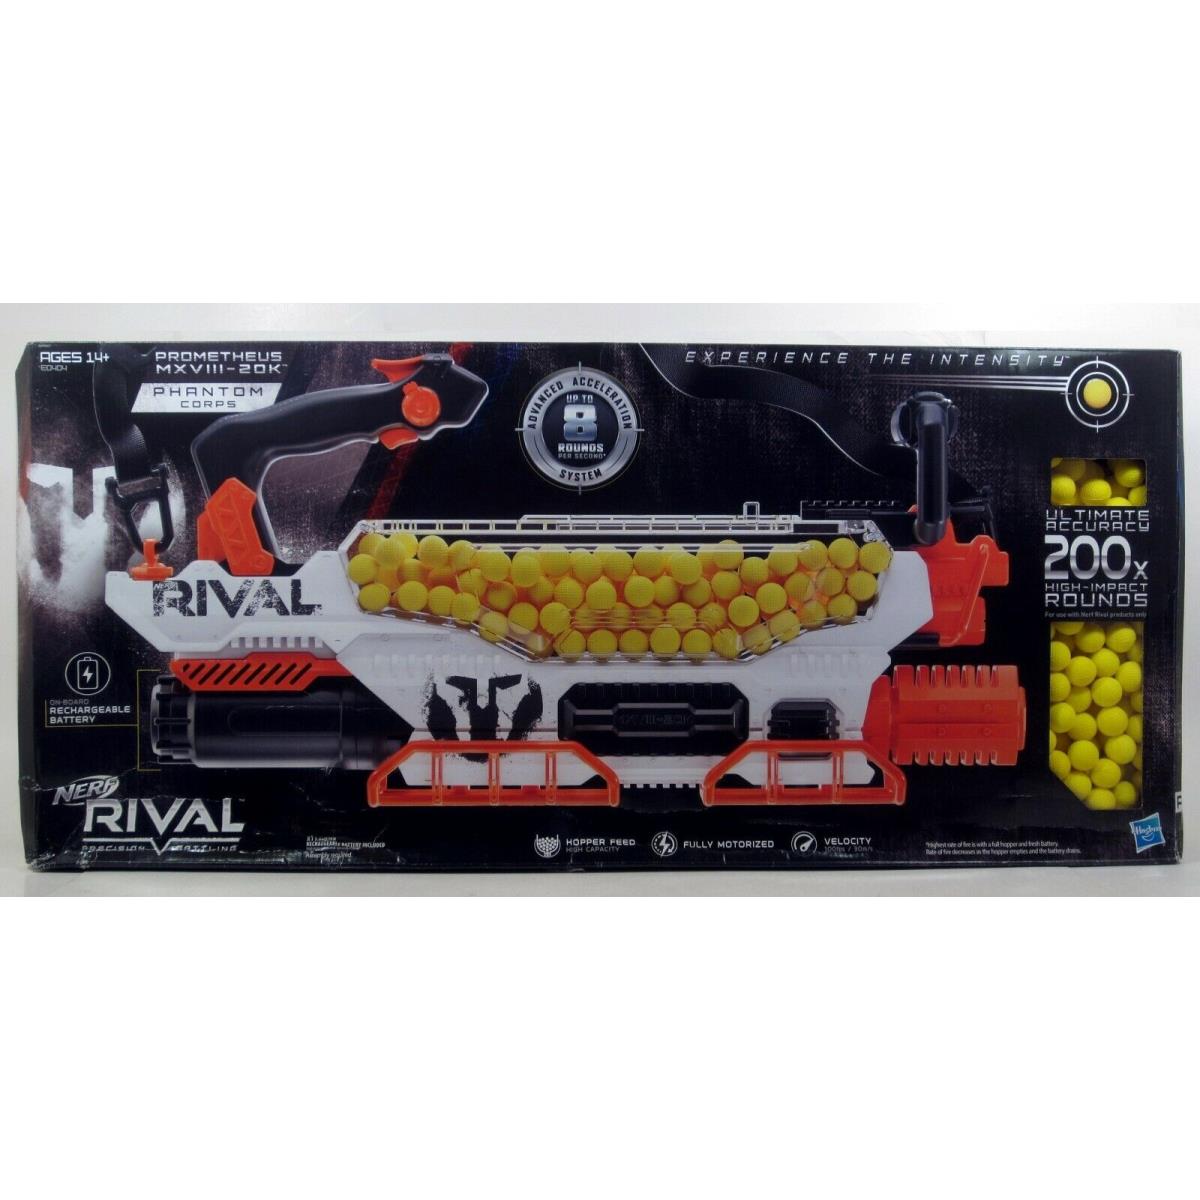 Nerf Rival Prometheus MXVIII-20K Blaster with 200 Rounds - in Dinged Box